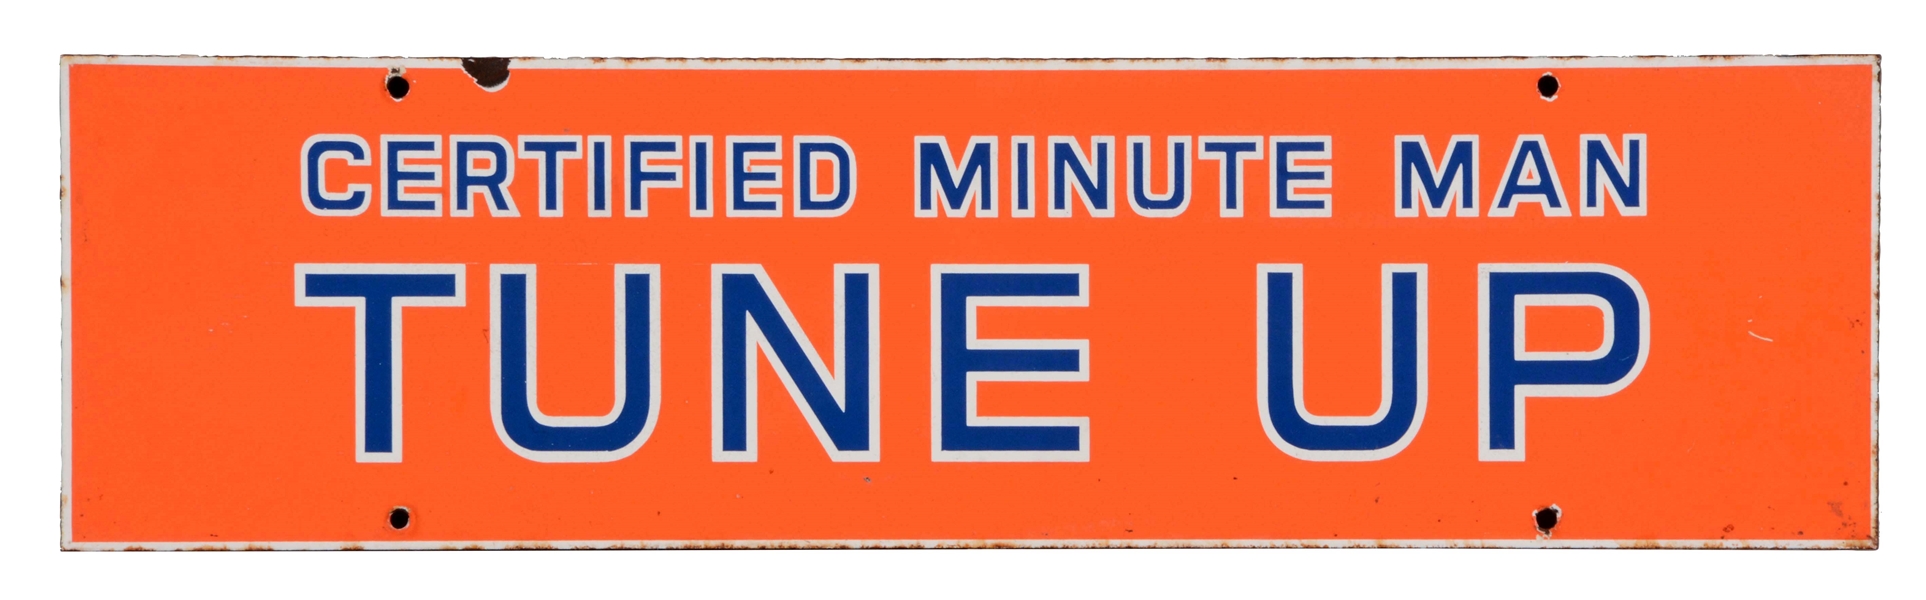 UNION 76 CERTIFIED MINUTE MAN TUNE UP PORCELAIN SIGN.